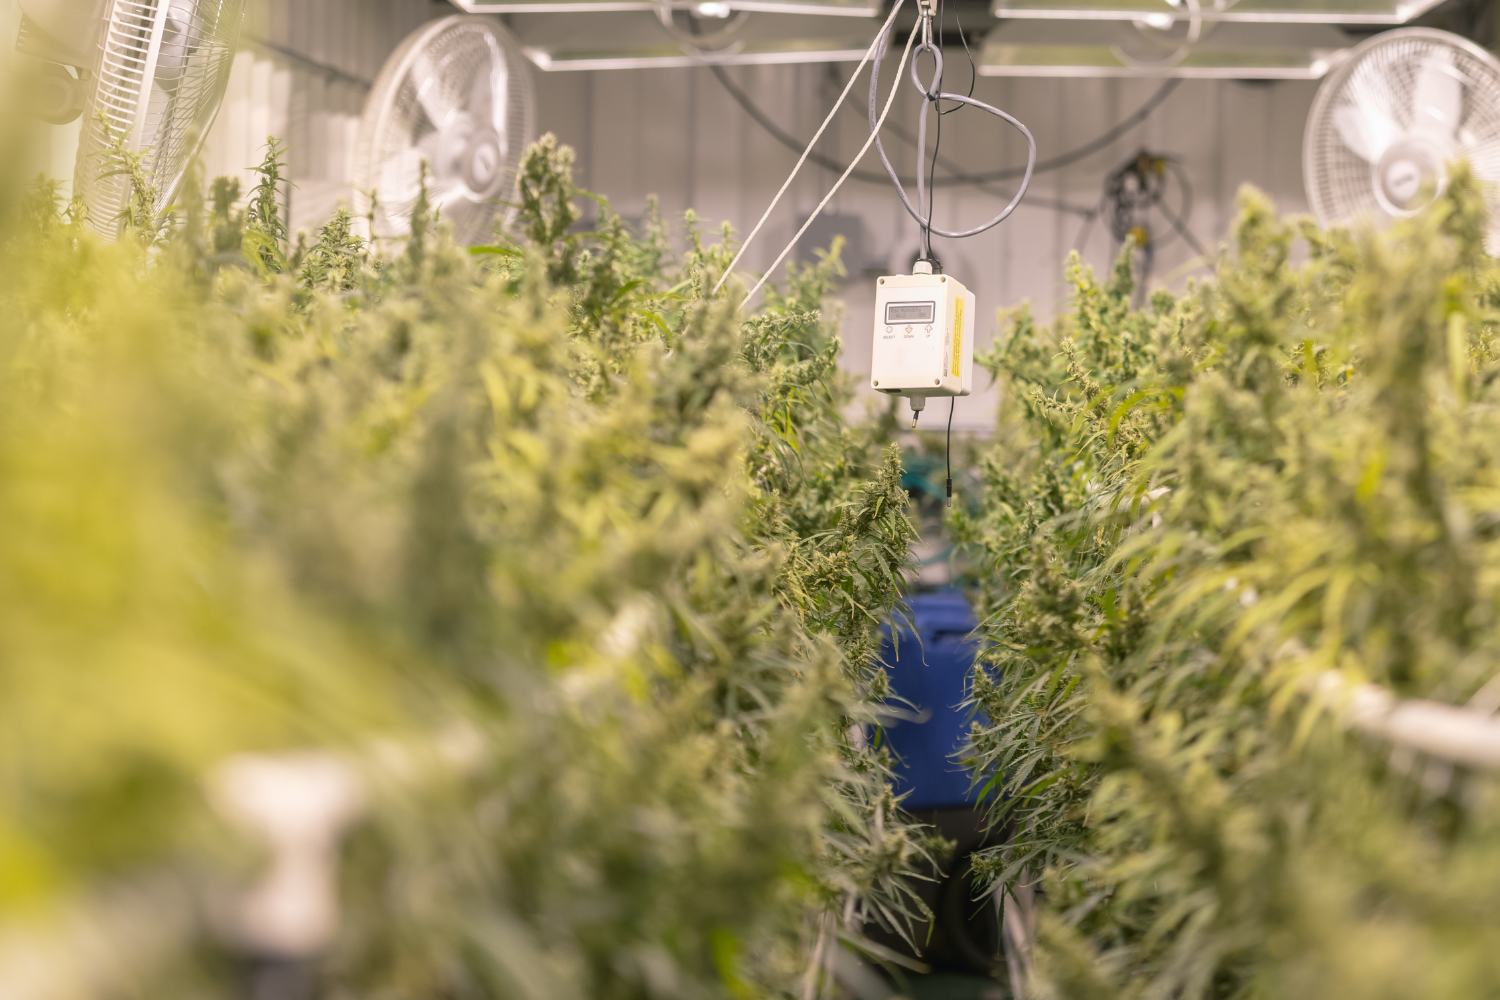 Image of a cannabis grow operation